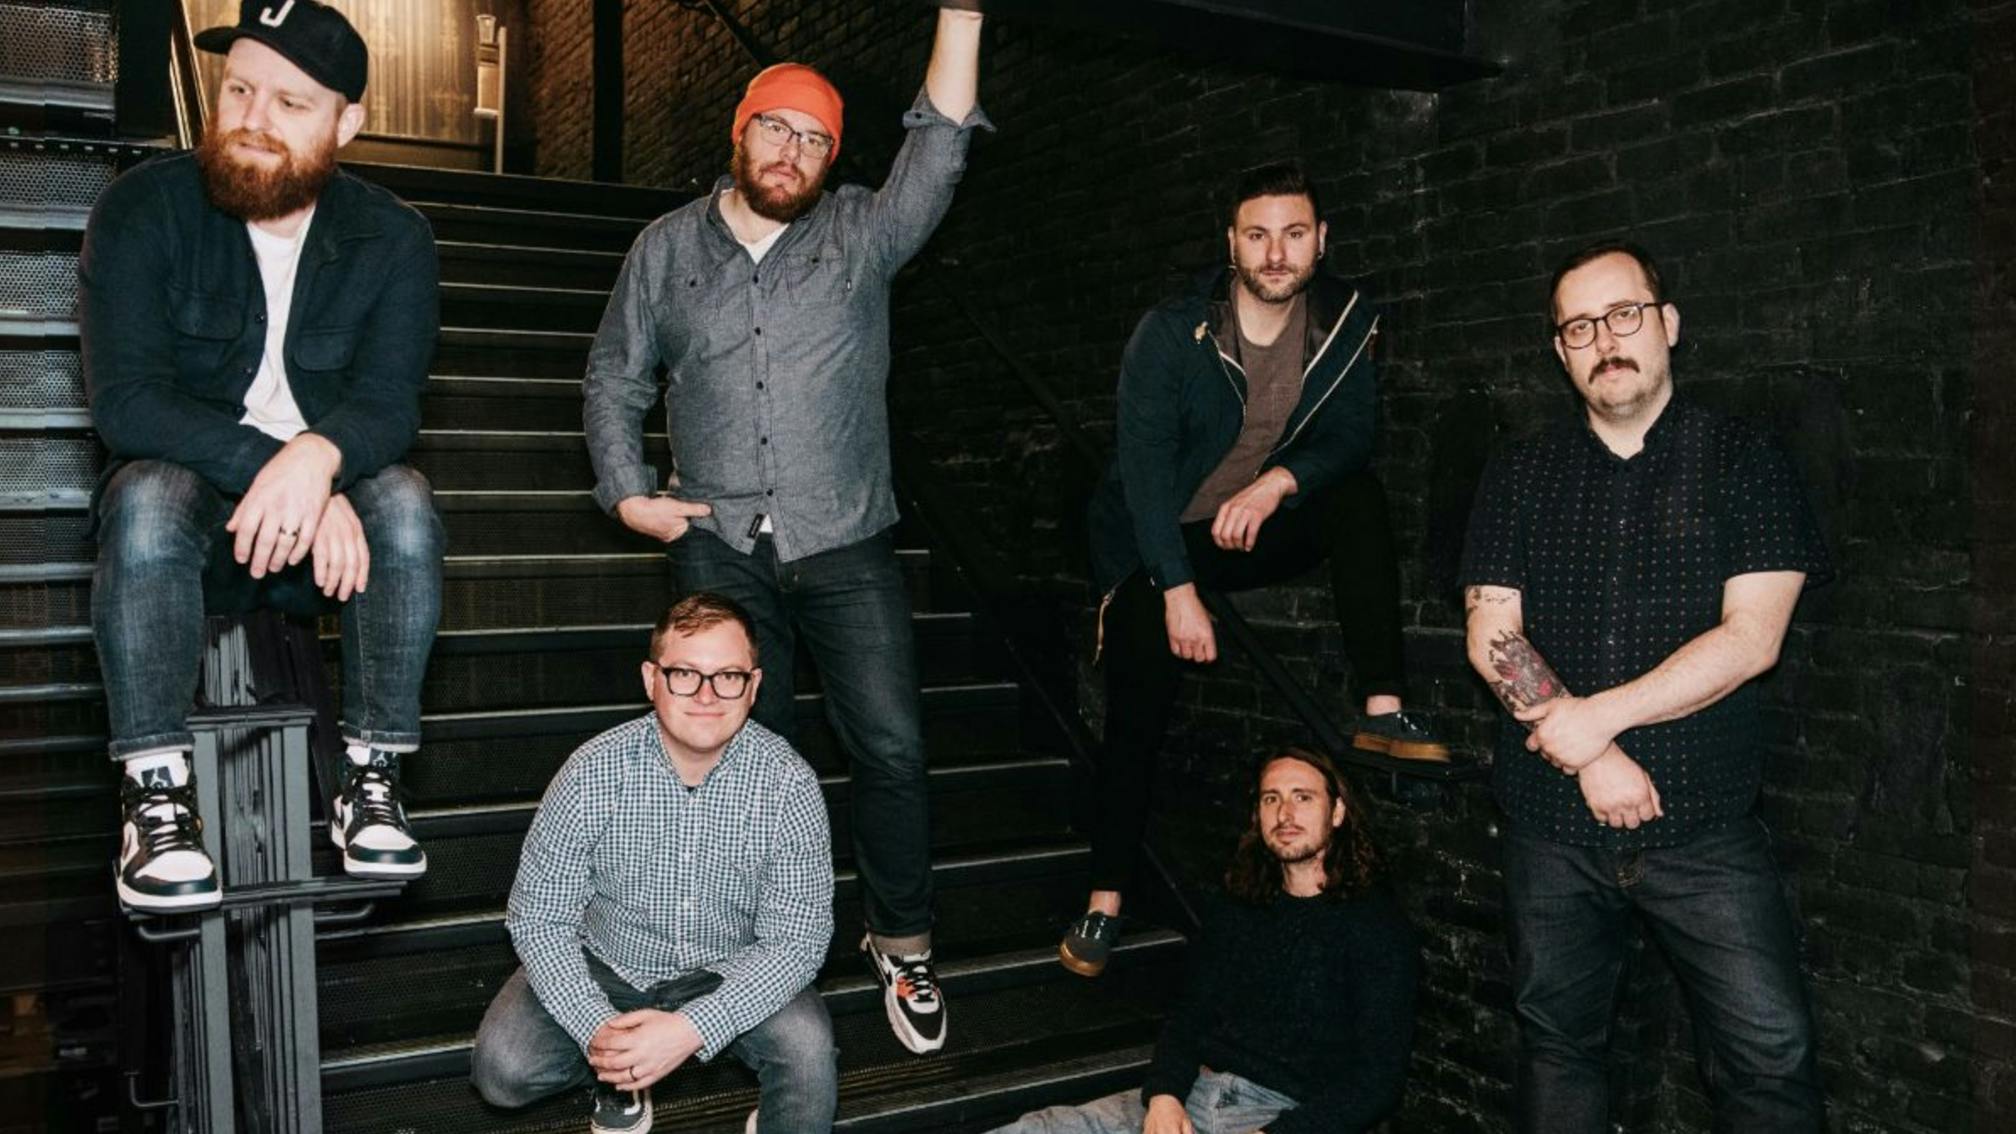 The Wonder Years’ Dan Campbell: “I wanted these songs to exist, so I made them. You should make art that you f*cking love”